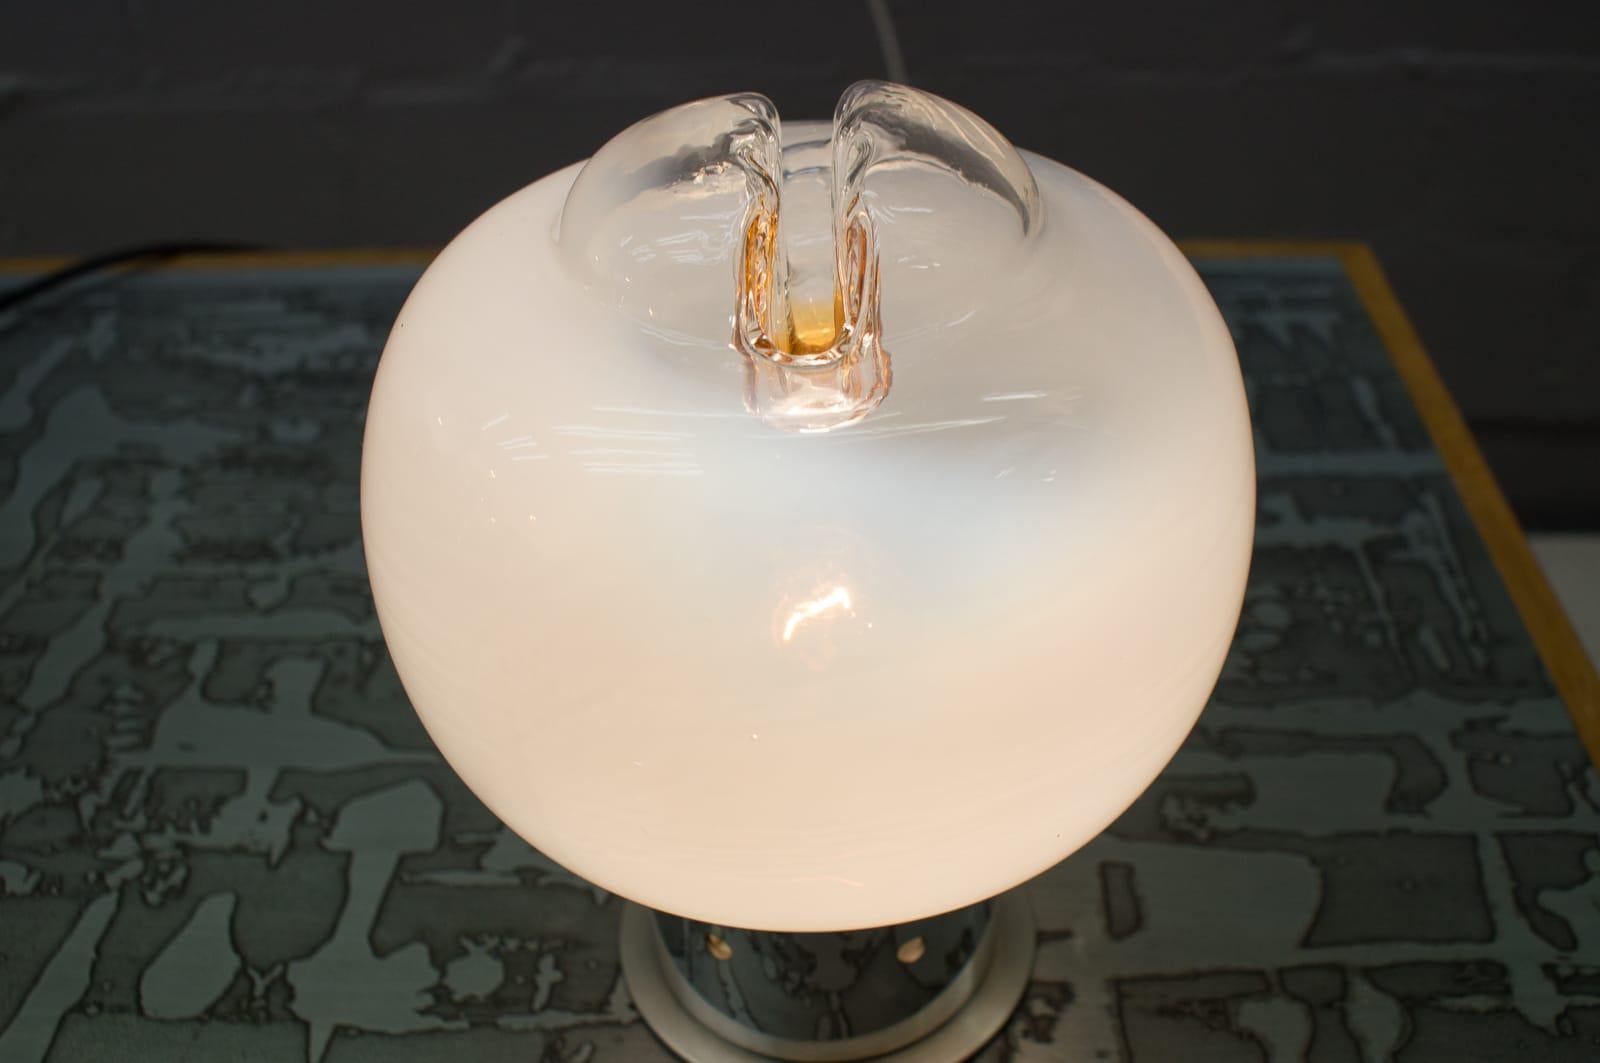 Rare Complete Set of Mazzega Lamps, Floor, Table, Wall and Ceiling Lamp, 1960s For Sale 5